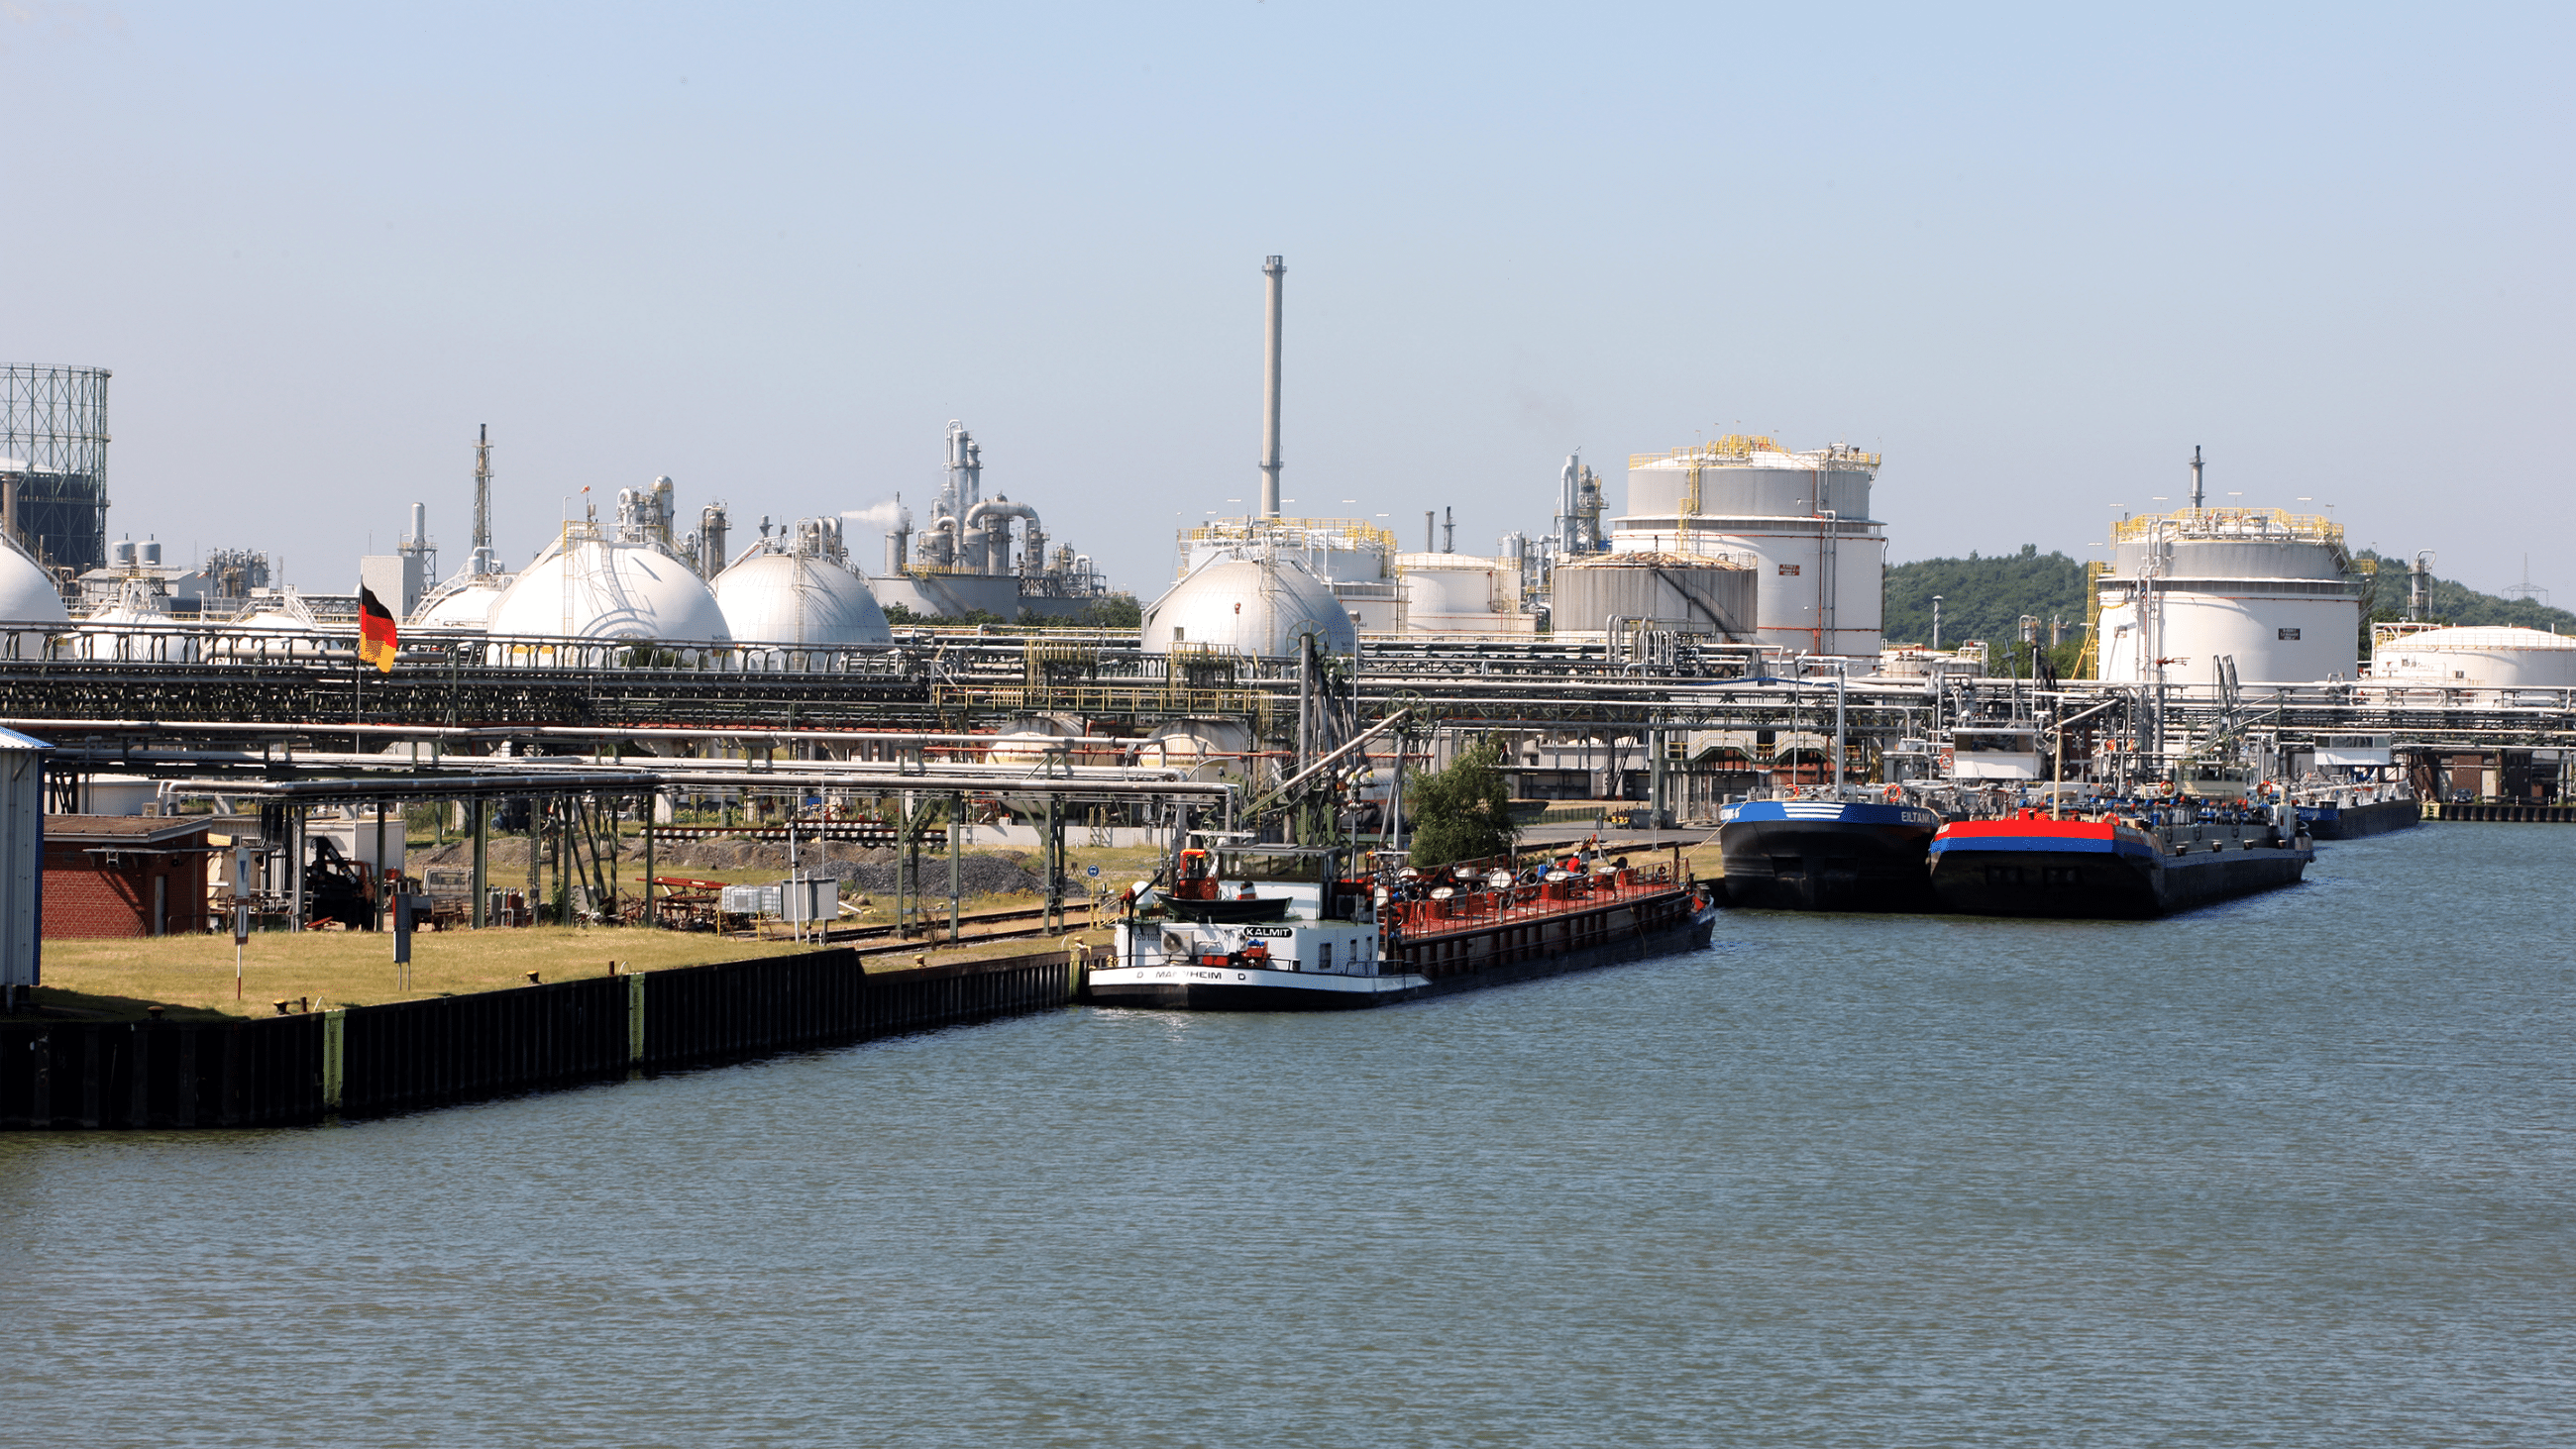 Marl Chemical Park: port facility with ships on the Wesel-Datteln canal